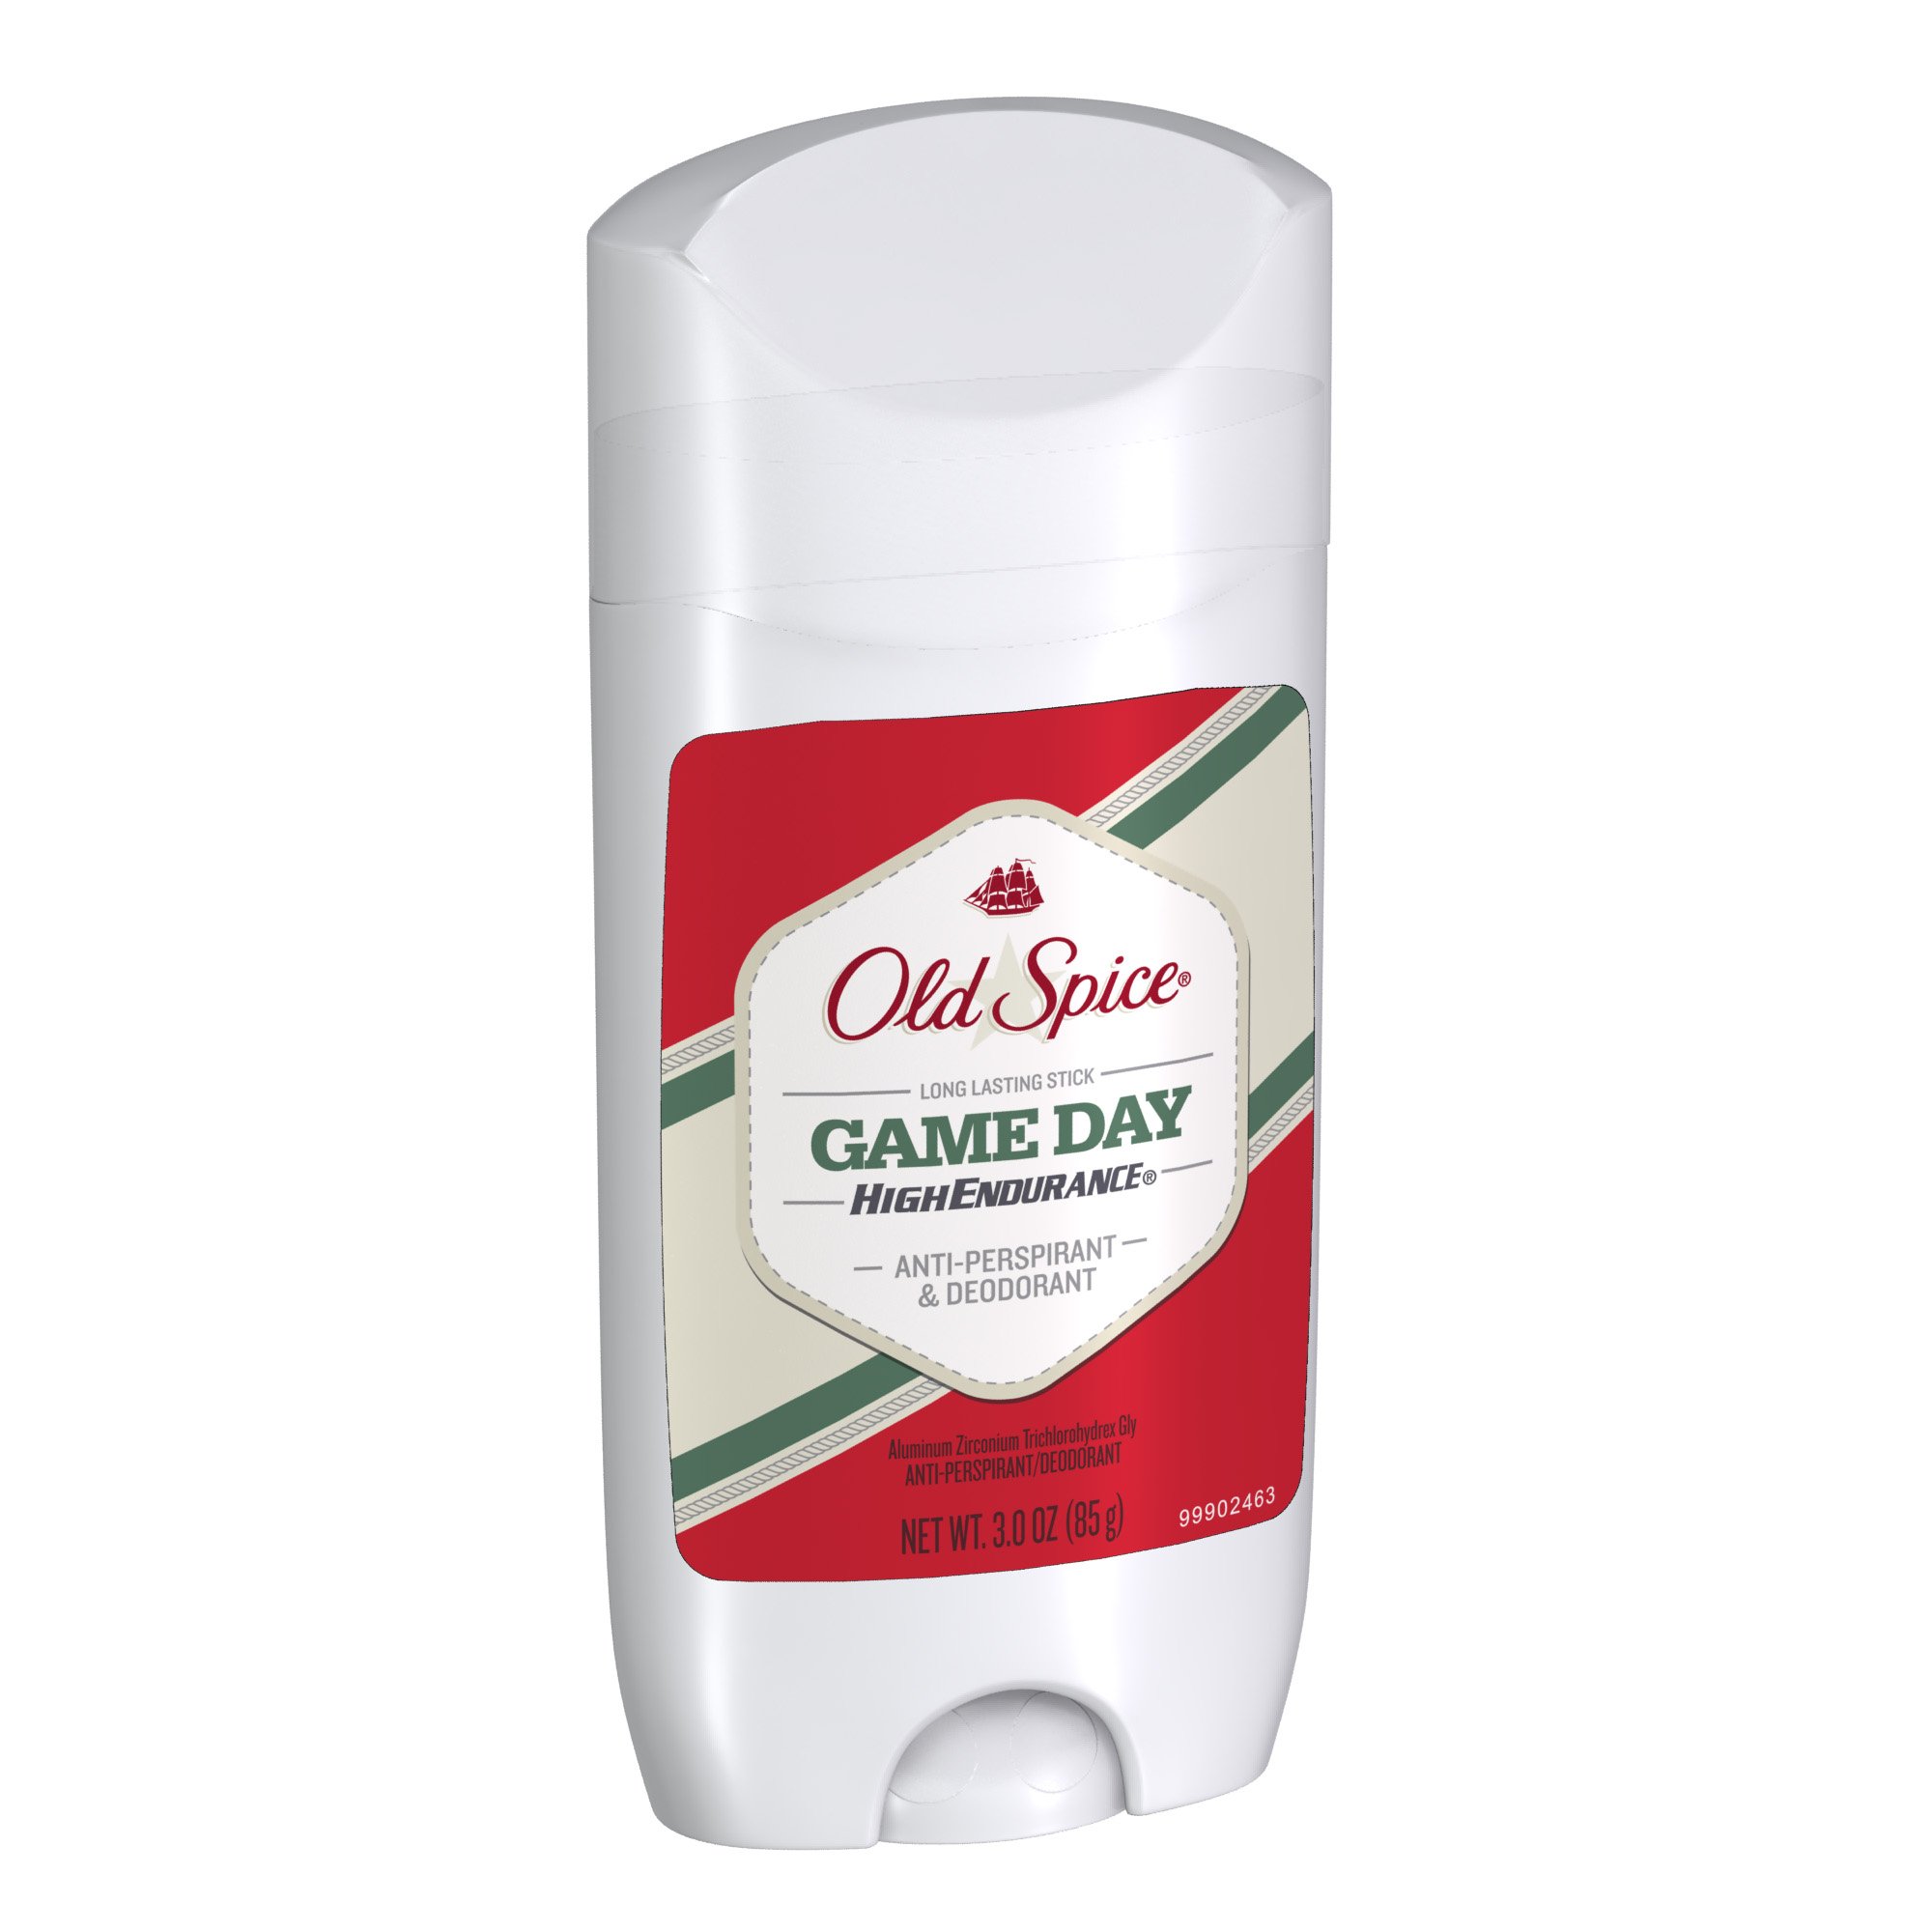 Old Spice Antiperspirant and Deodorant for Men, High Endurance, Game Day Long Lasting Stick, 3 Oz (Pack of 6)